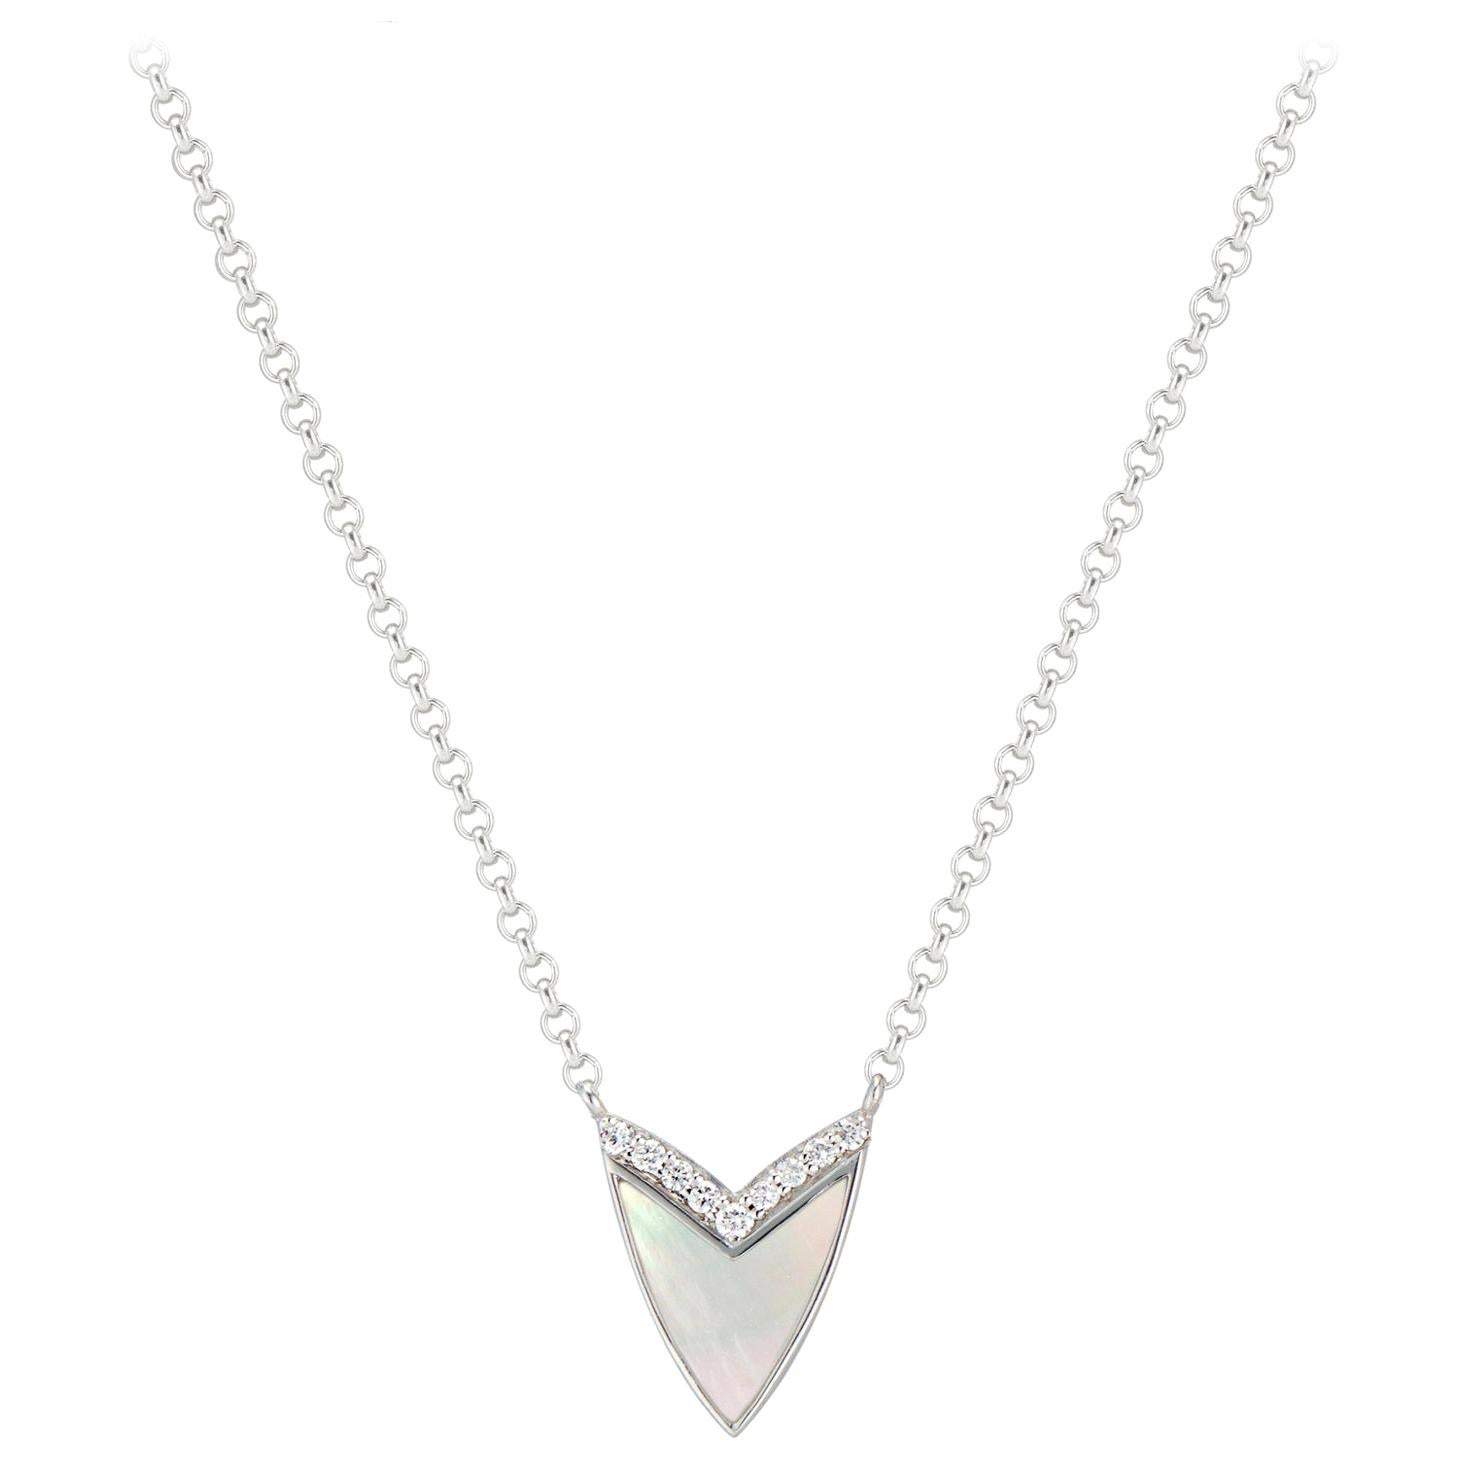 Subtly elegant, Ri Noor’s Cubist Heart Necklace with Mother of Pearl and Diamonds adds a refined sophistication to any outfit. The pendant takes inspiration from the shape of a heart, abstracting it to a geometric form complete with a V of brilliant